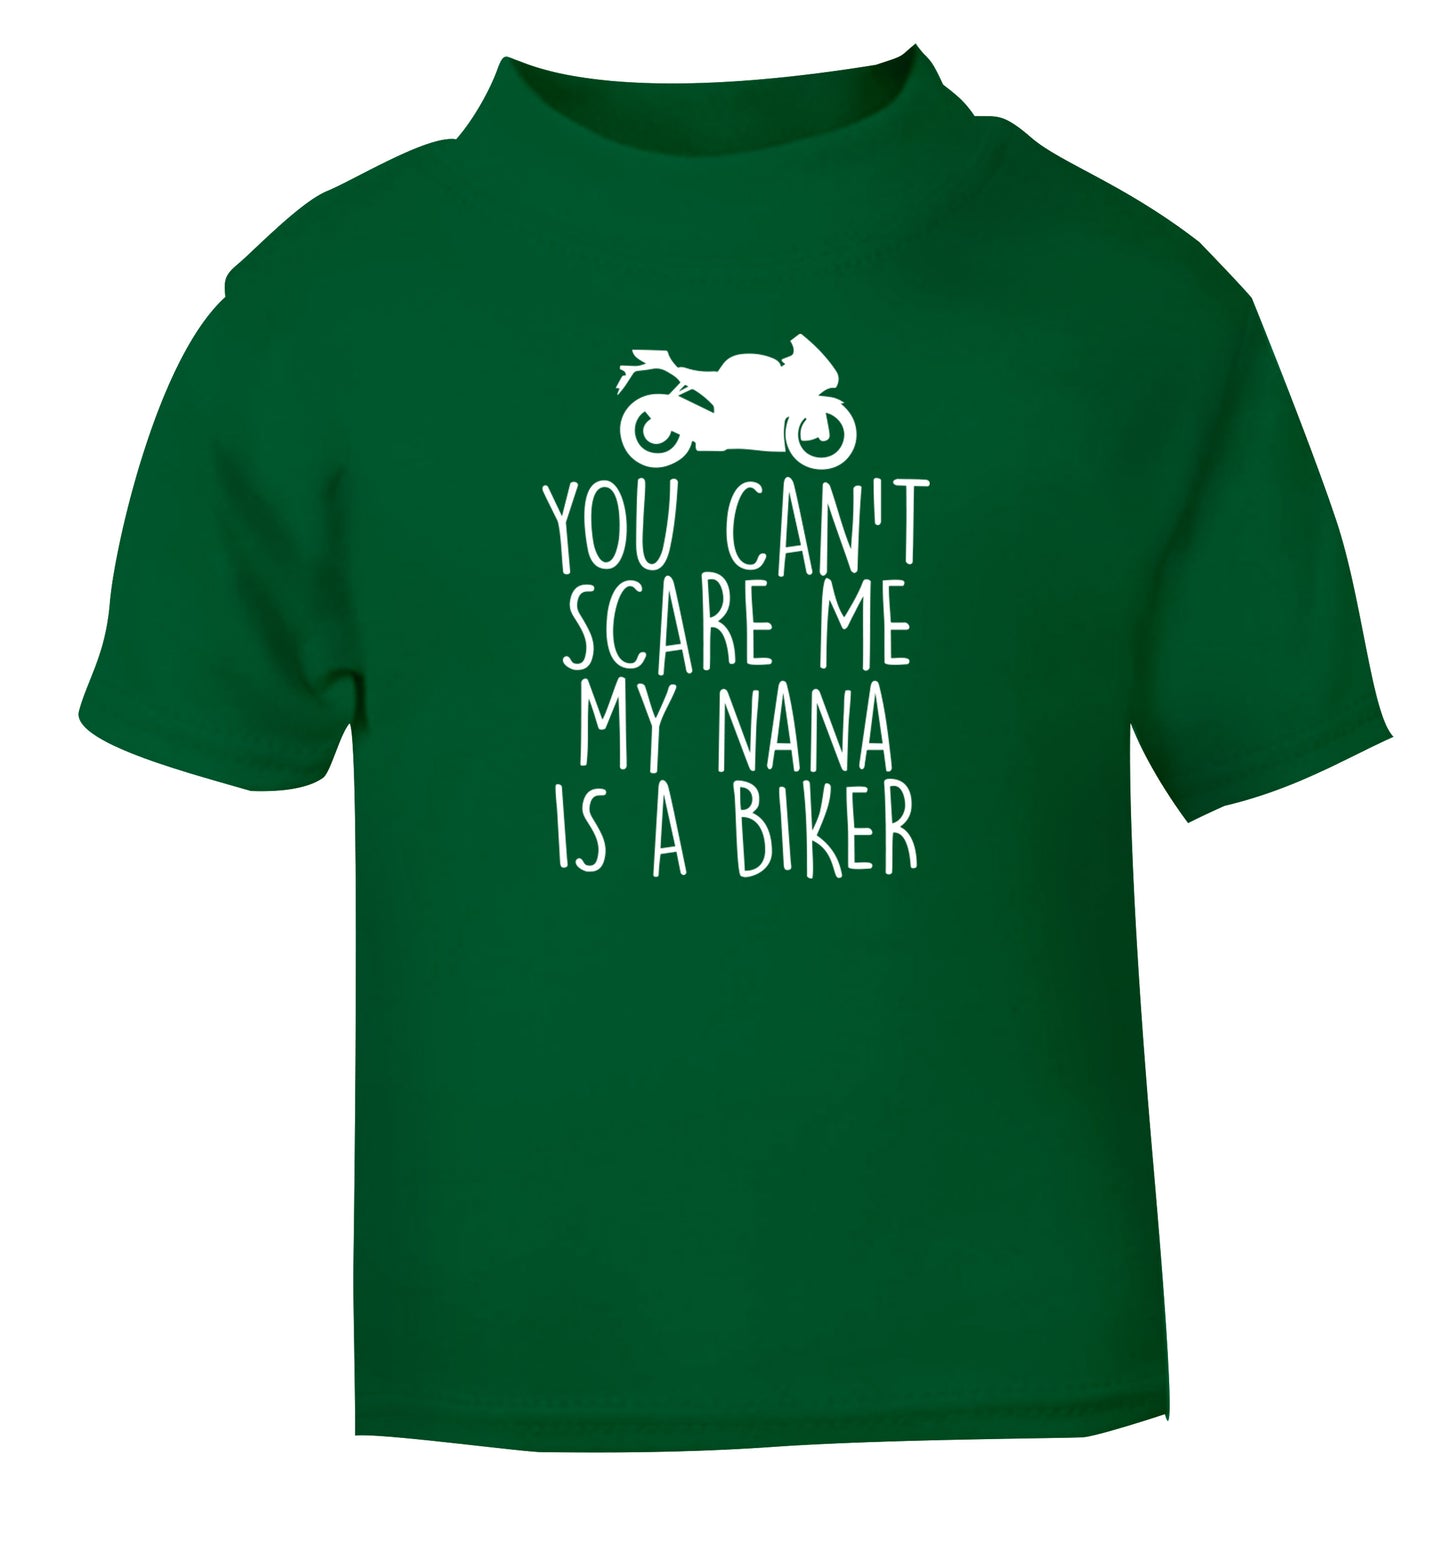 You can't scare me my nana is a biker green Baby Toddler Tshirt 2 Years